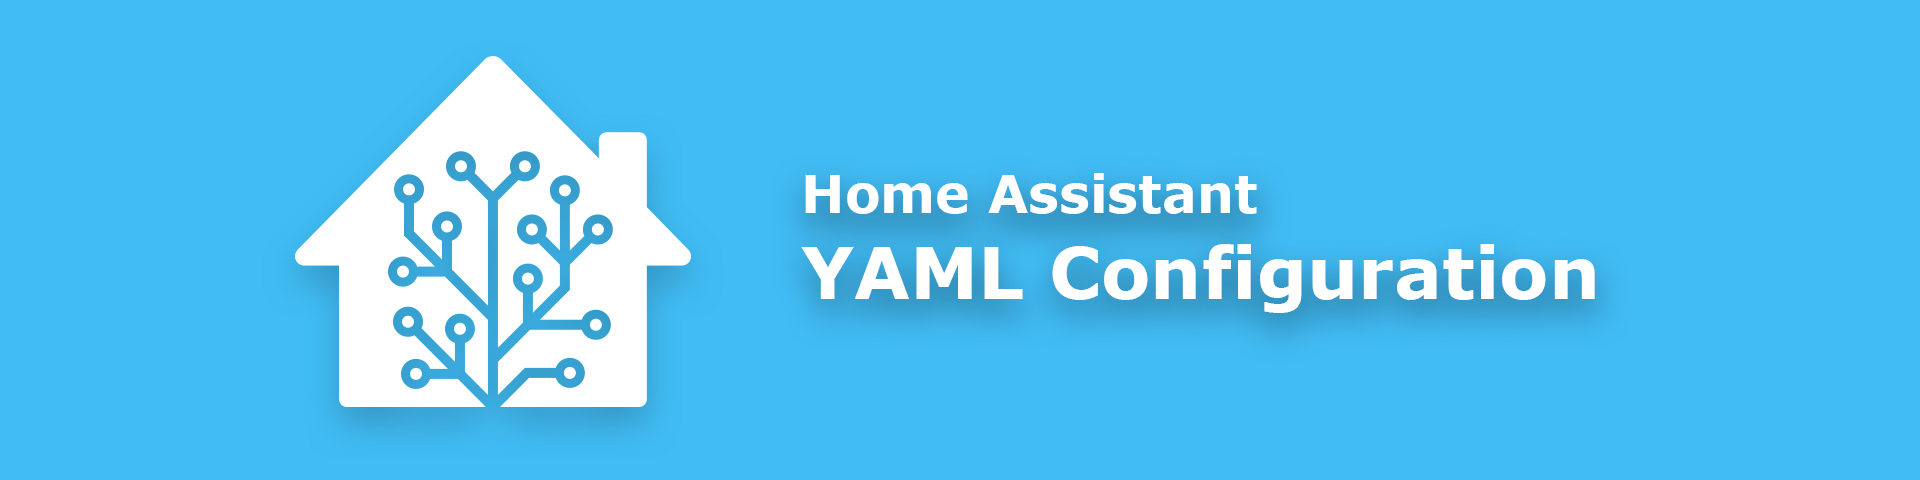 Home Assistant configuration in YAML